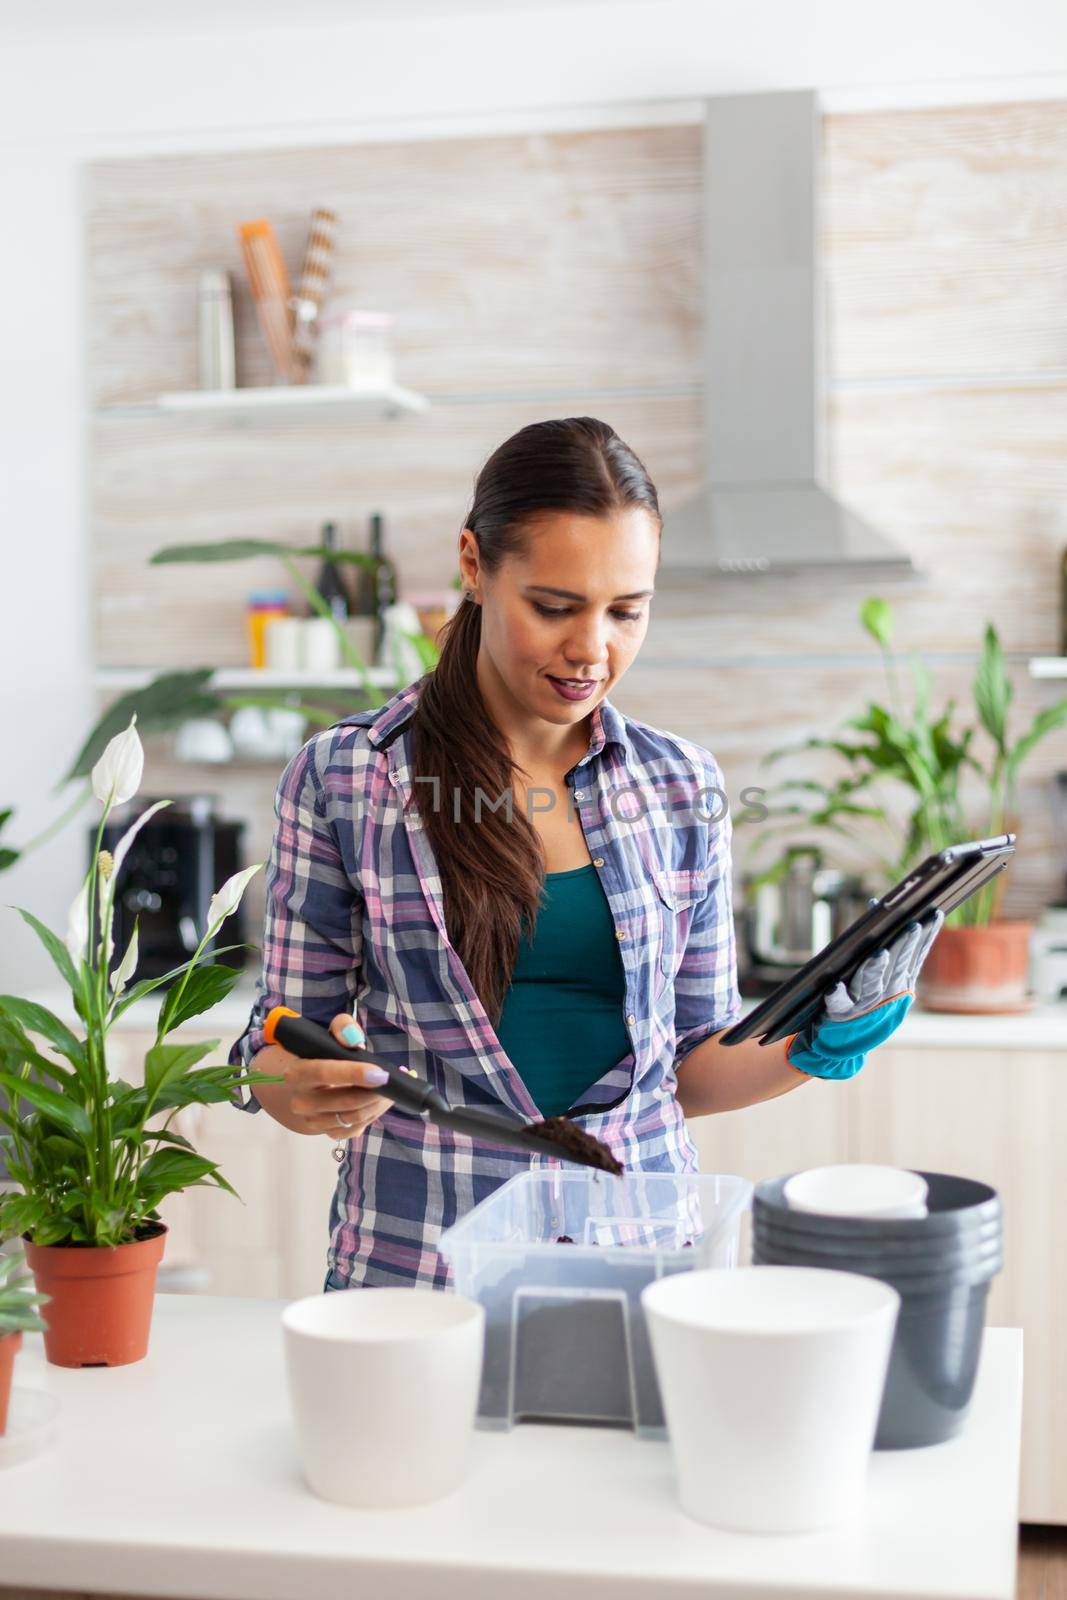 Woman checking soil for flowers during home gardening and holding tablet pc. Decorative, plants, growing, lifestyle, design, botanica, dirt, domestic, growh, leaf, hobby, seeding, appy, green.